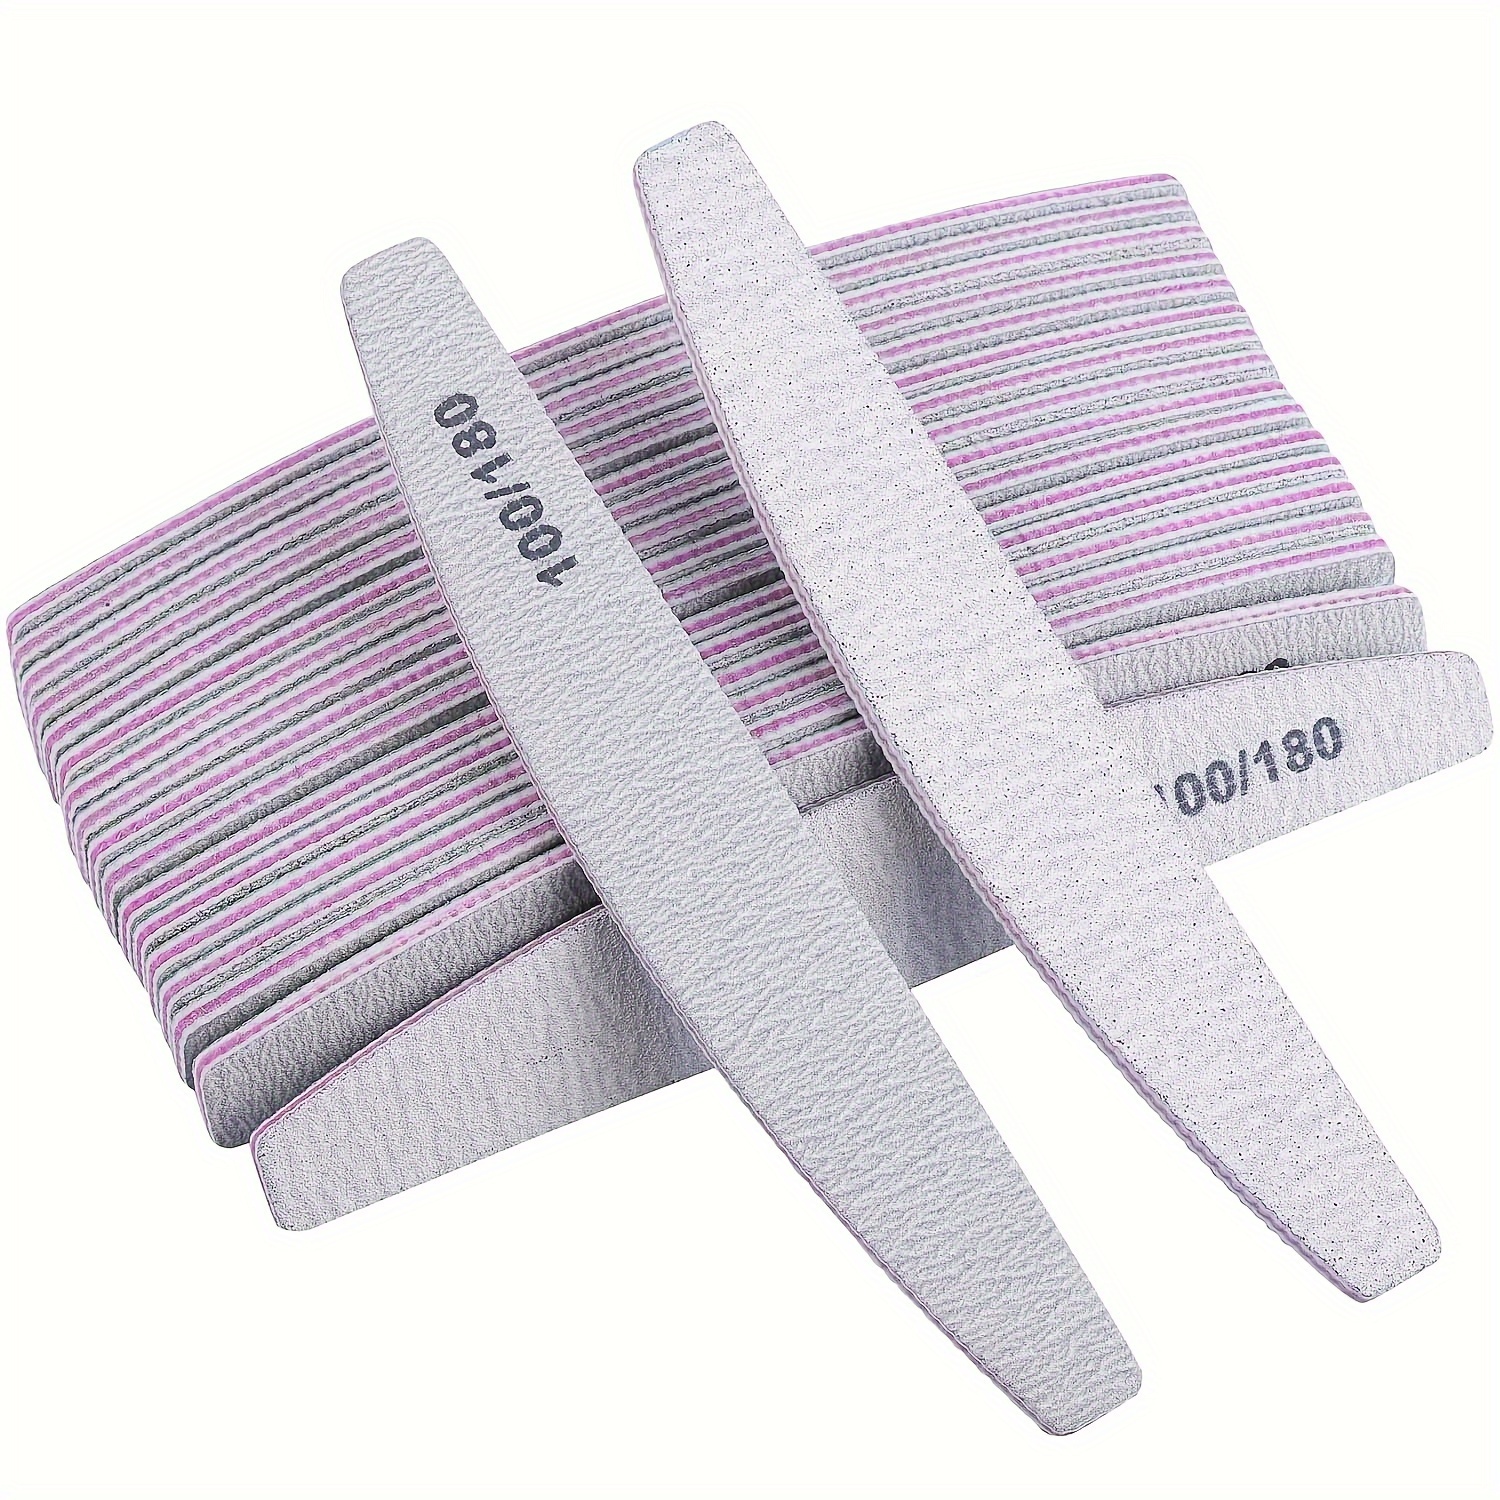 

10pcs Professional Nail File & Buffer Set - Dual Grit Emery Boards For Smooth Finish - Salon-quality Manicure Tools For Acrylic Nails & Nail Art Enthusiasts Nail Tech Supplies Nail Supplies